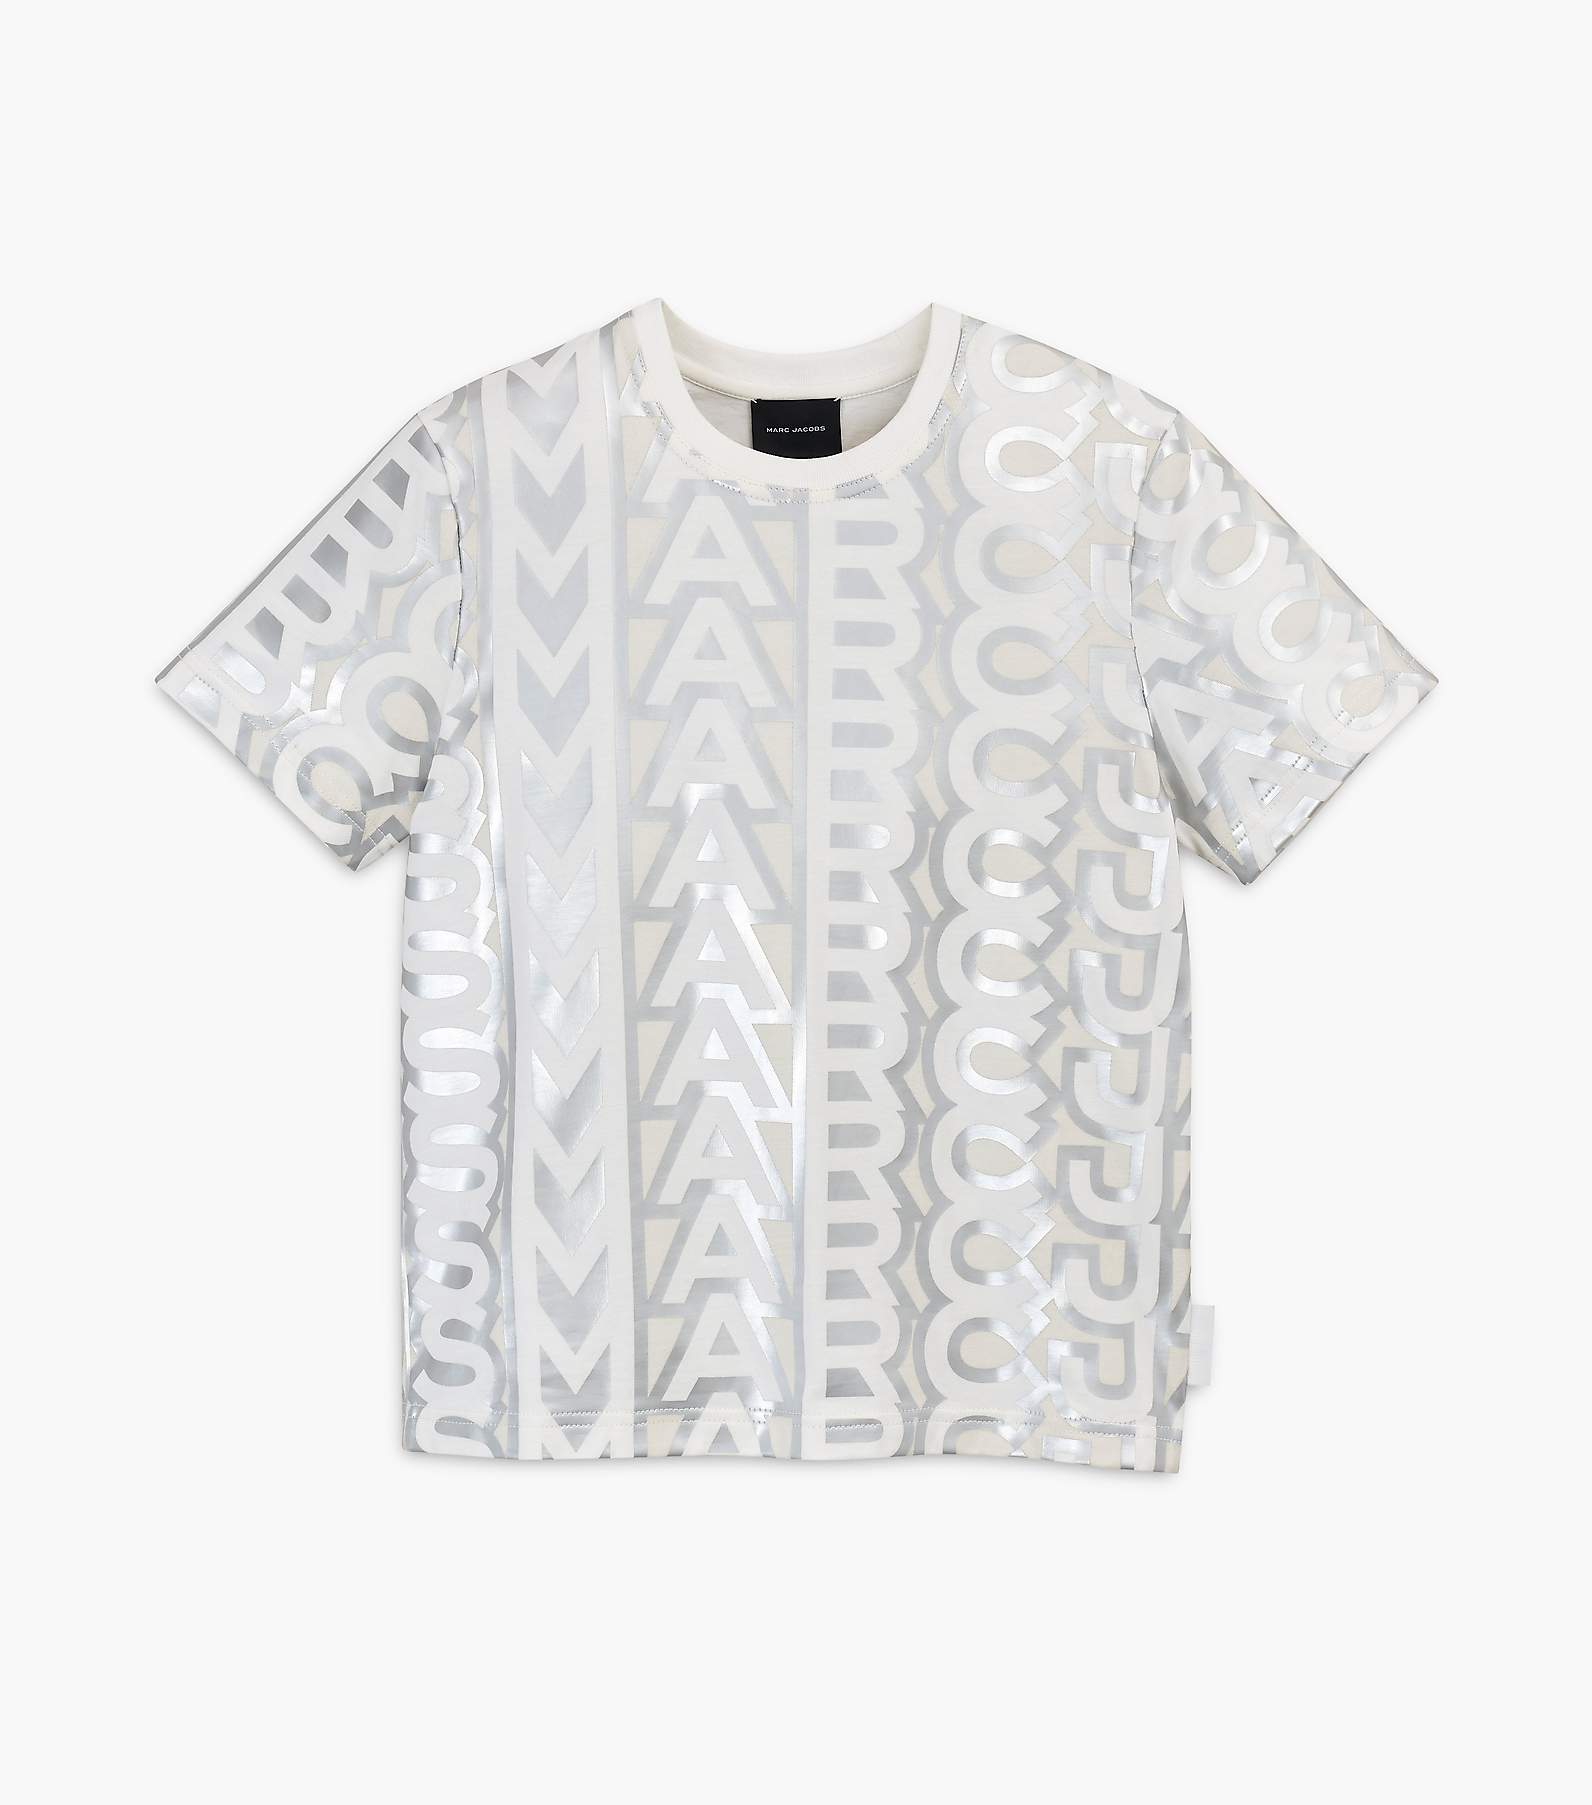 Marc Jacobs The Monogram Baby Tee in Silver/Bright White, Size Xs